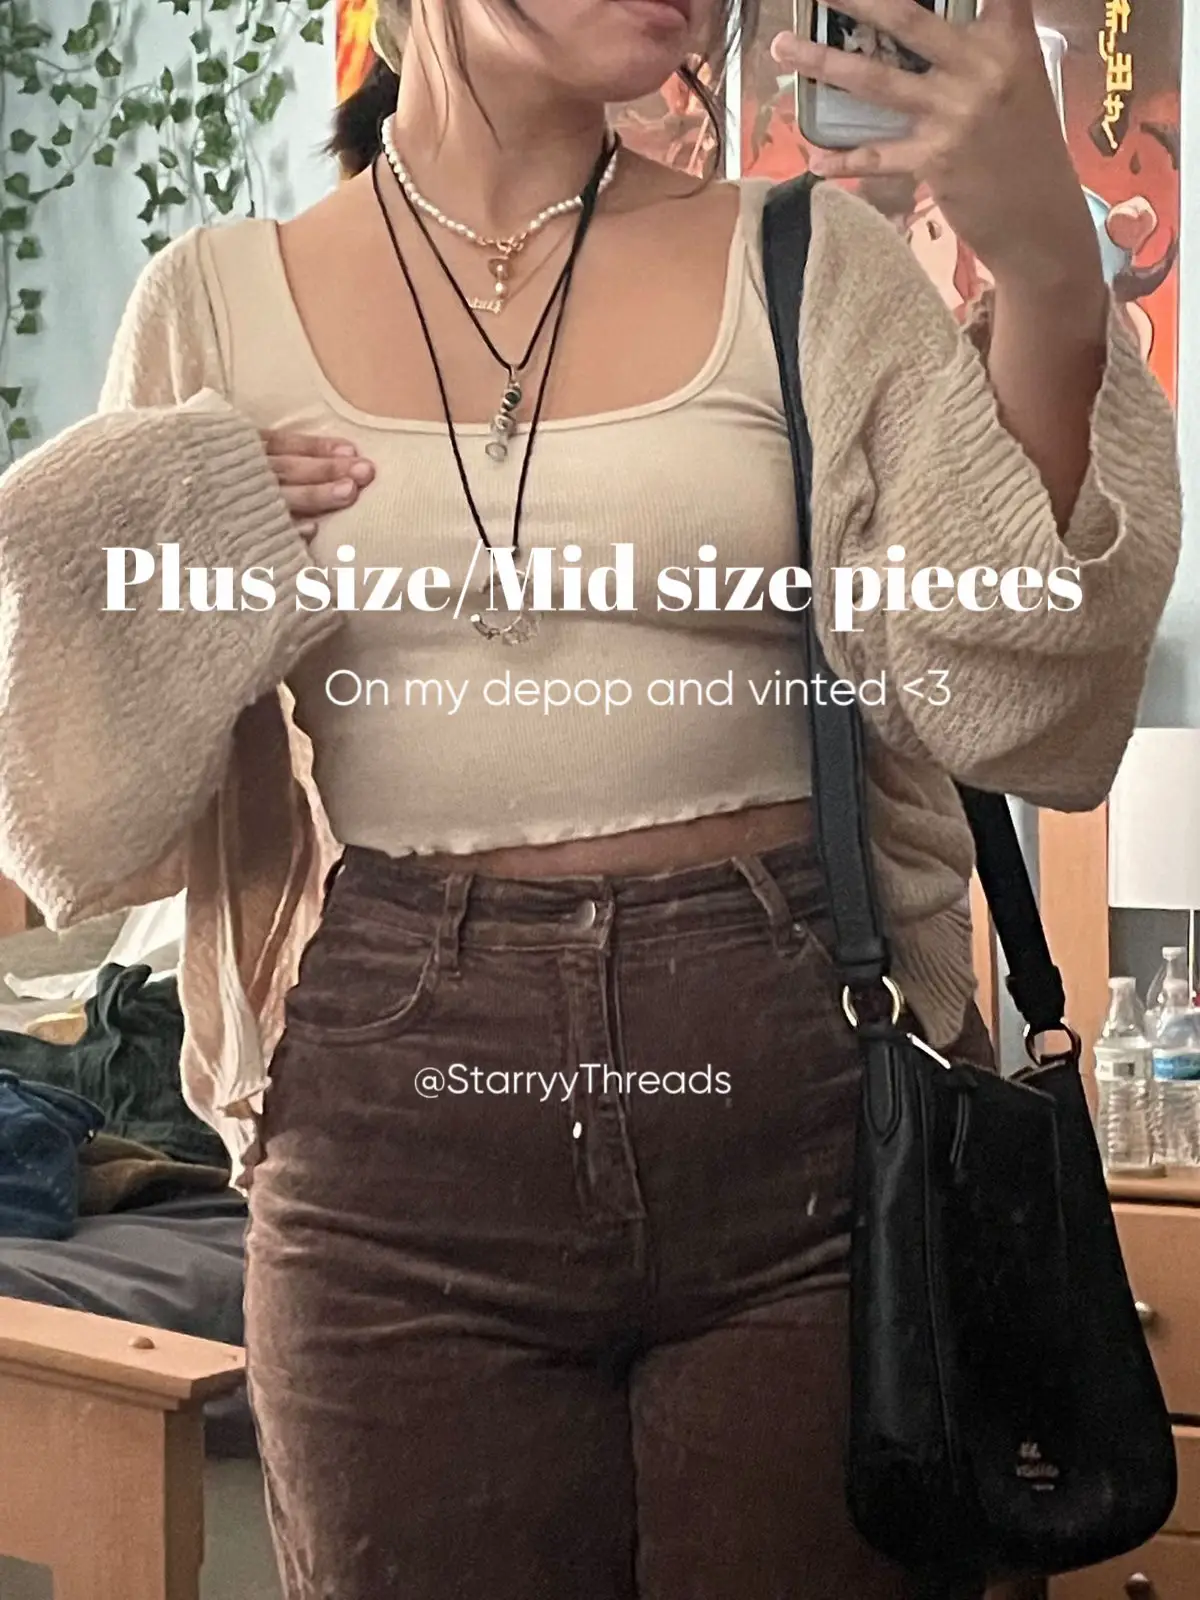 Plus size/Mid size pieces, Gallery posted by Starryylissee